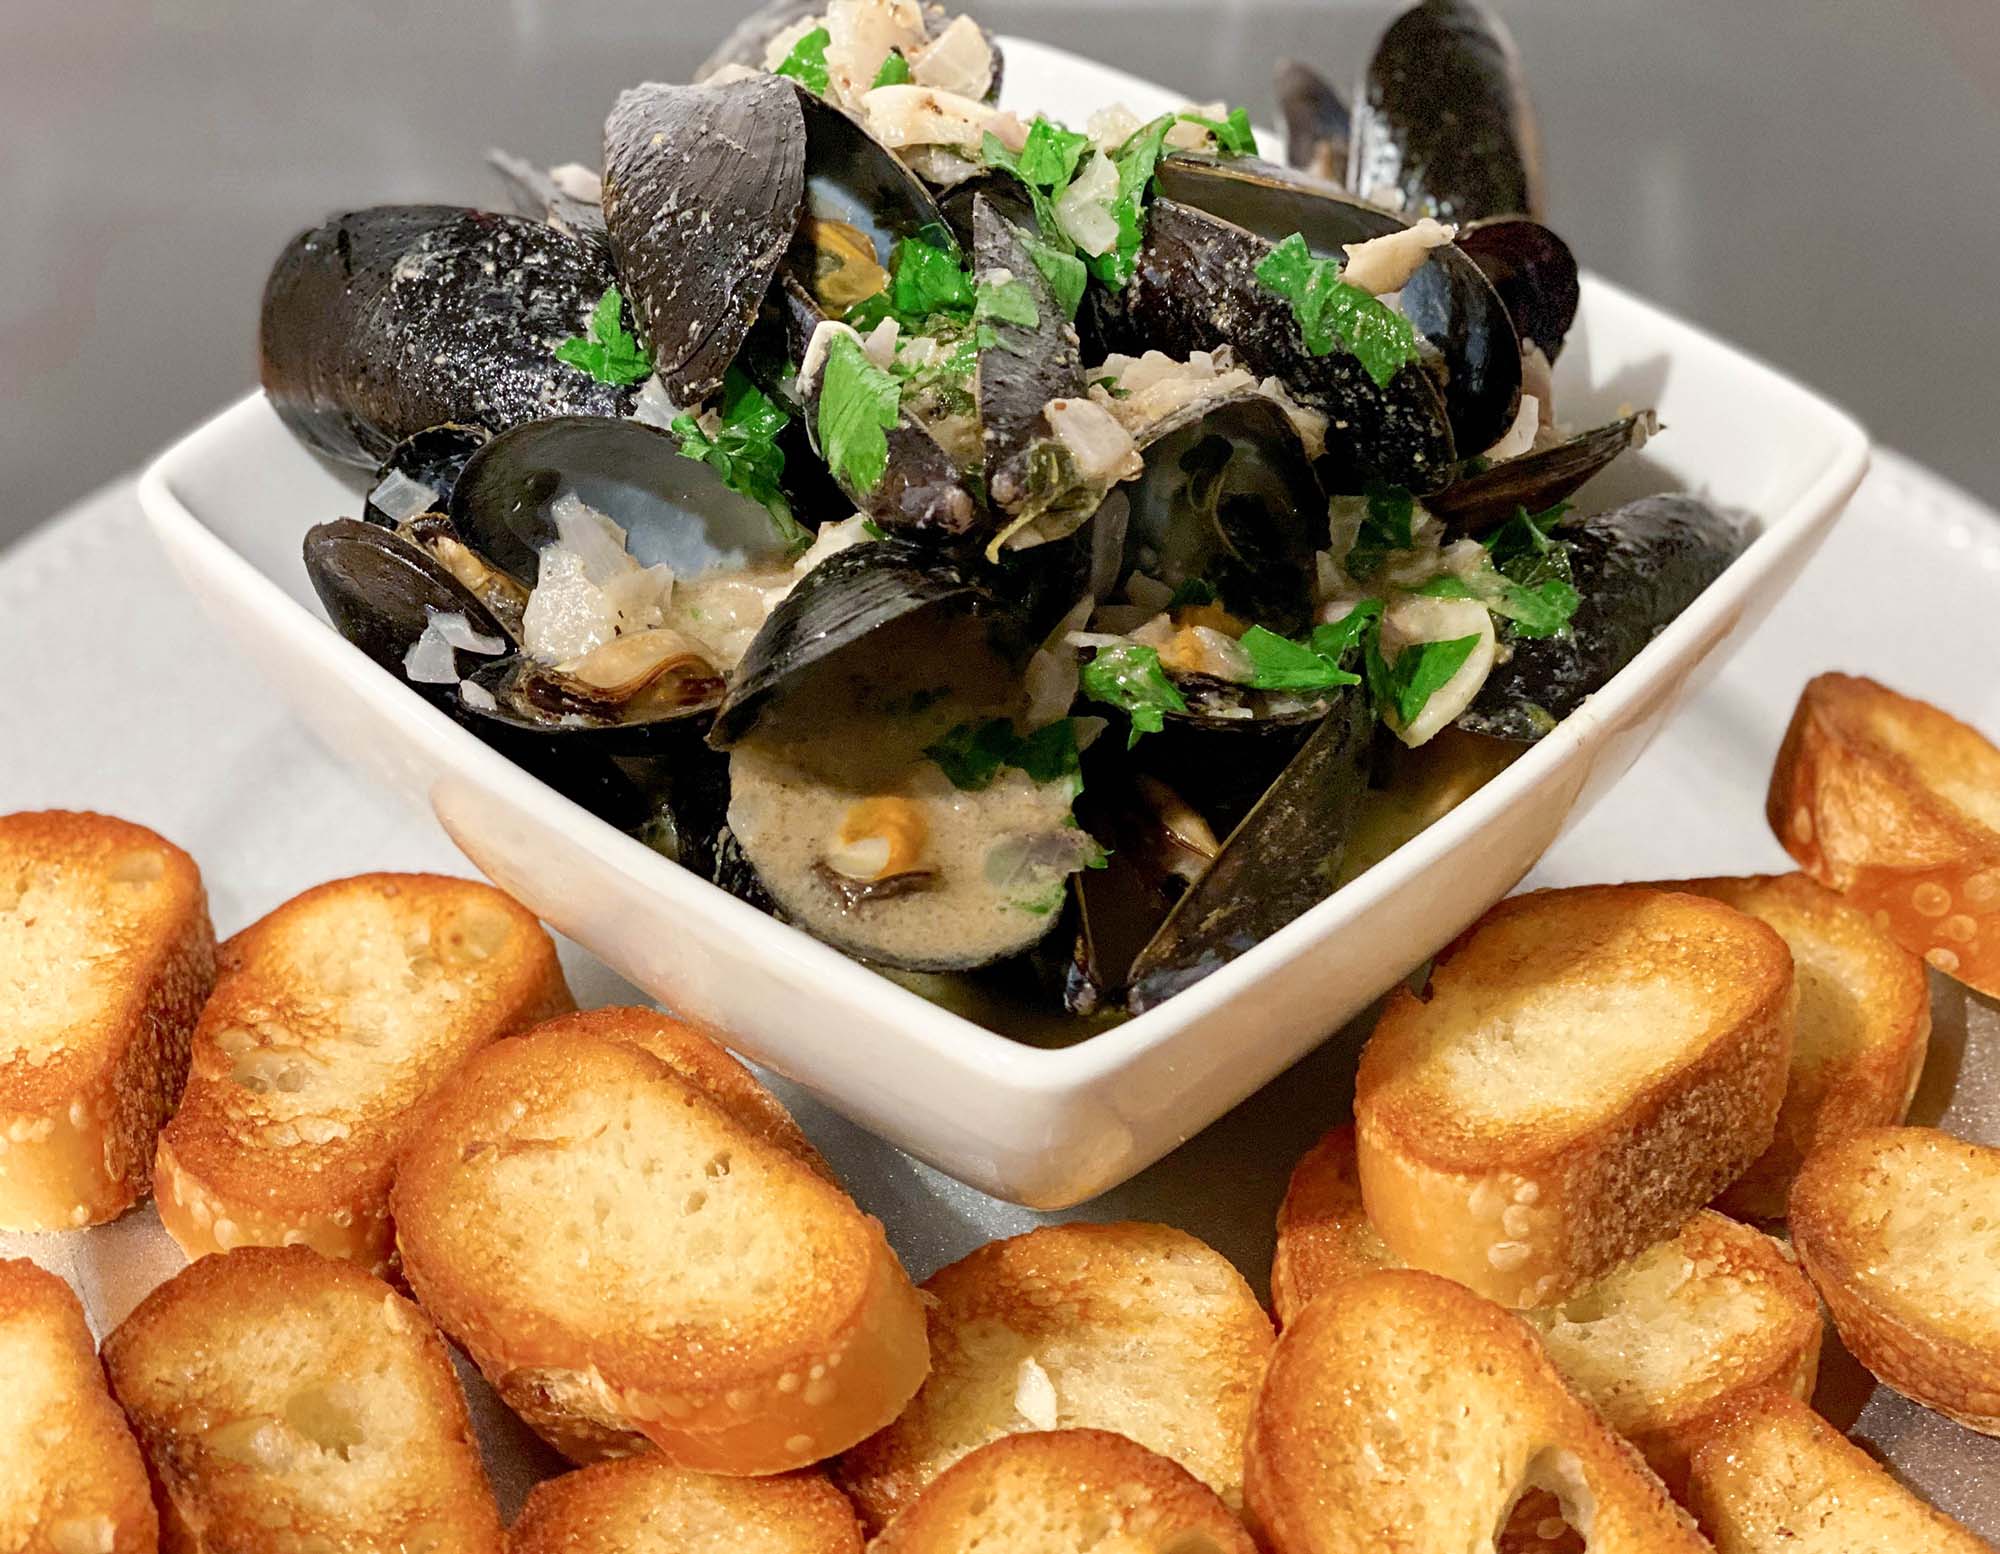 White Truffle Mussels in Wine Sauce made with White Truffle Sauce